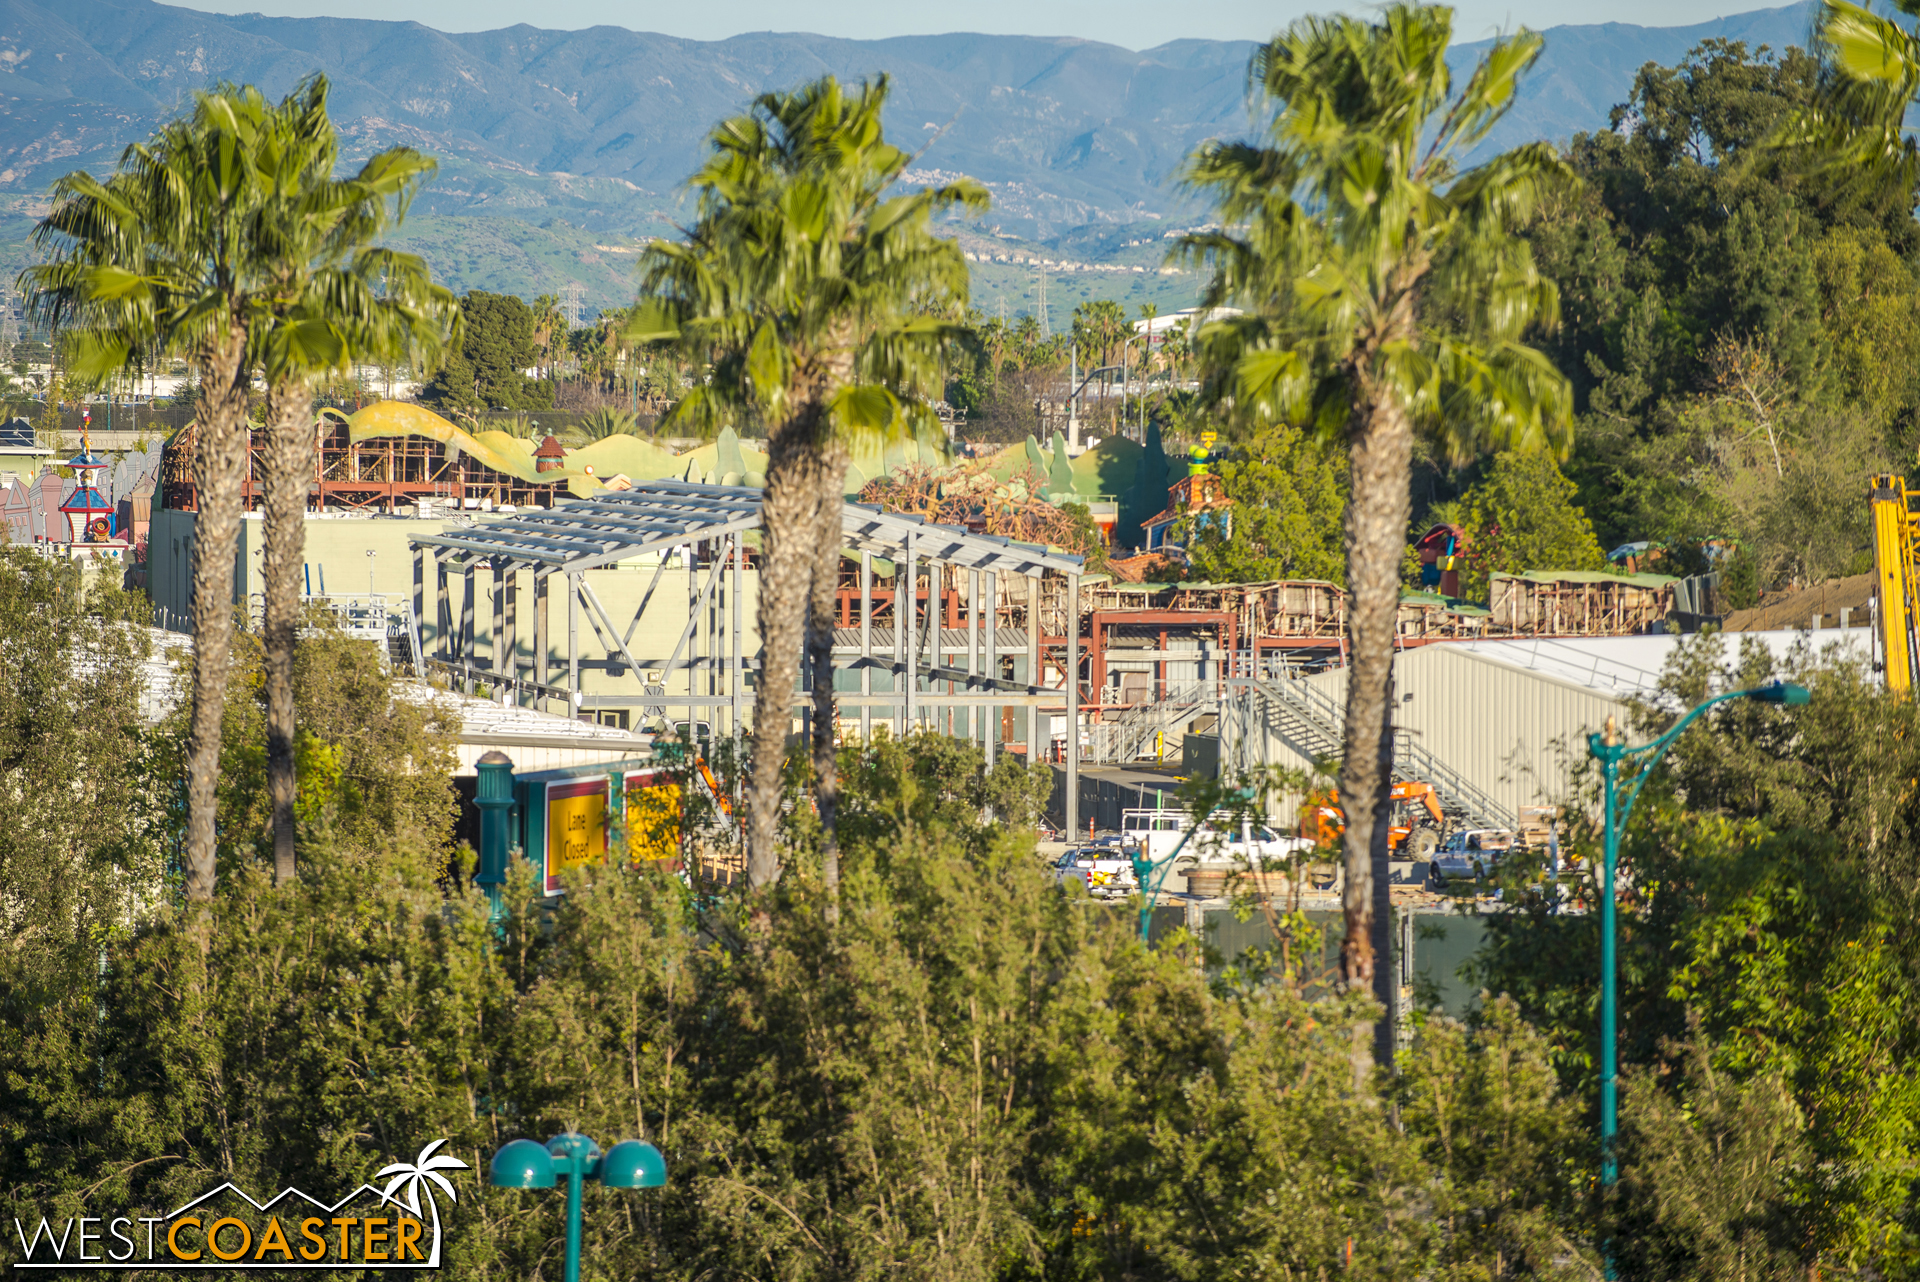  In the back of the site, near Mickey's Toontown, that giant shed building looks nearly fully framed. 